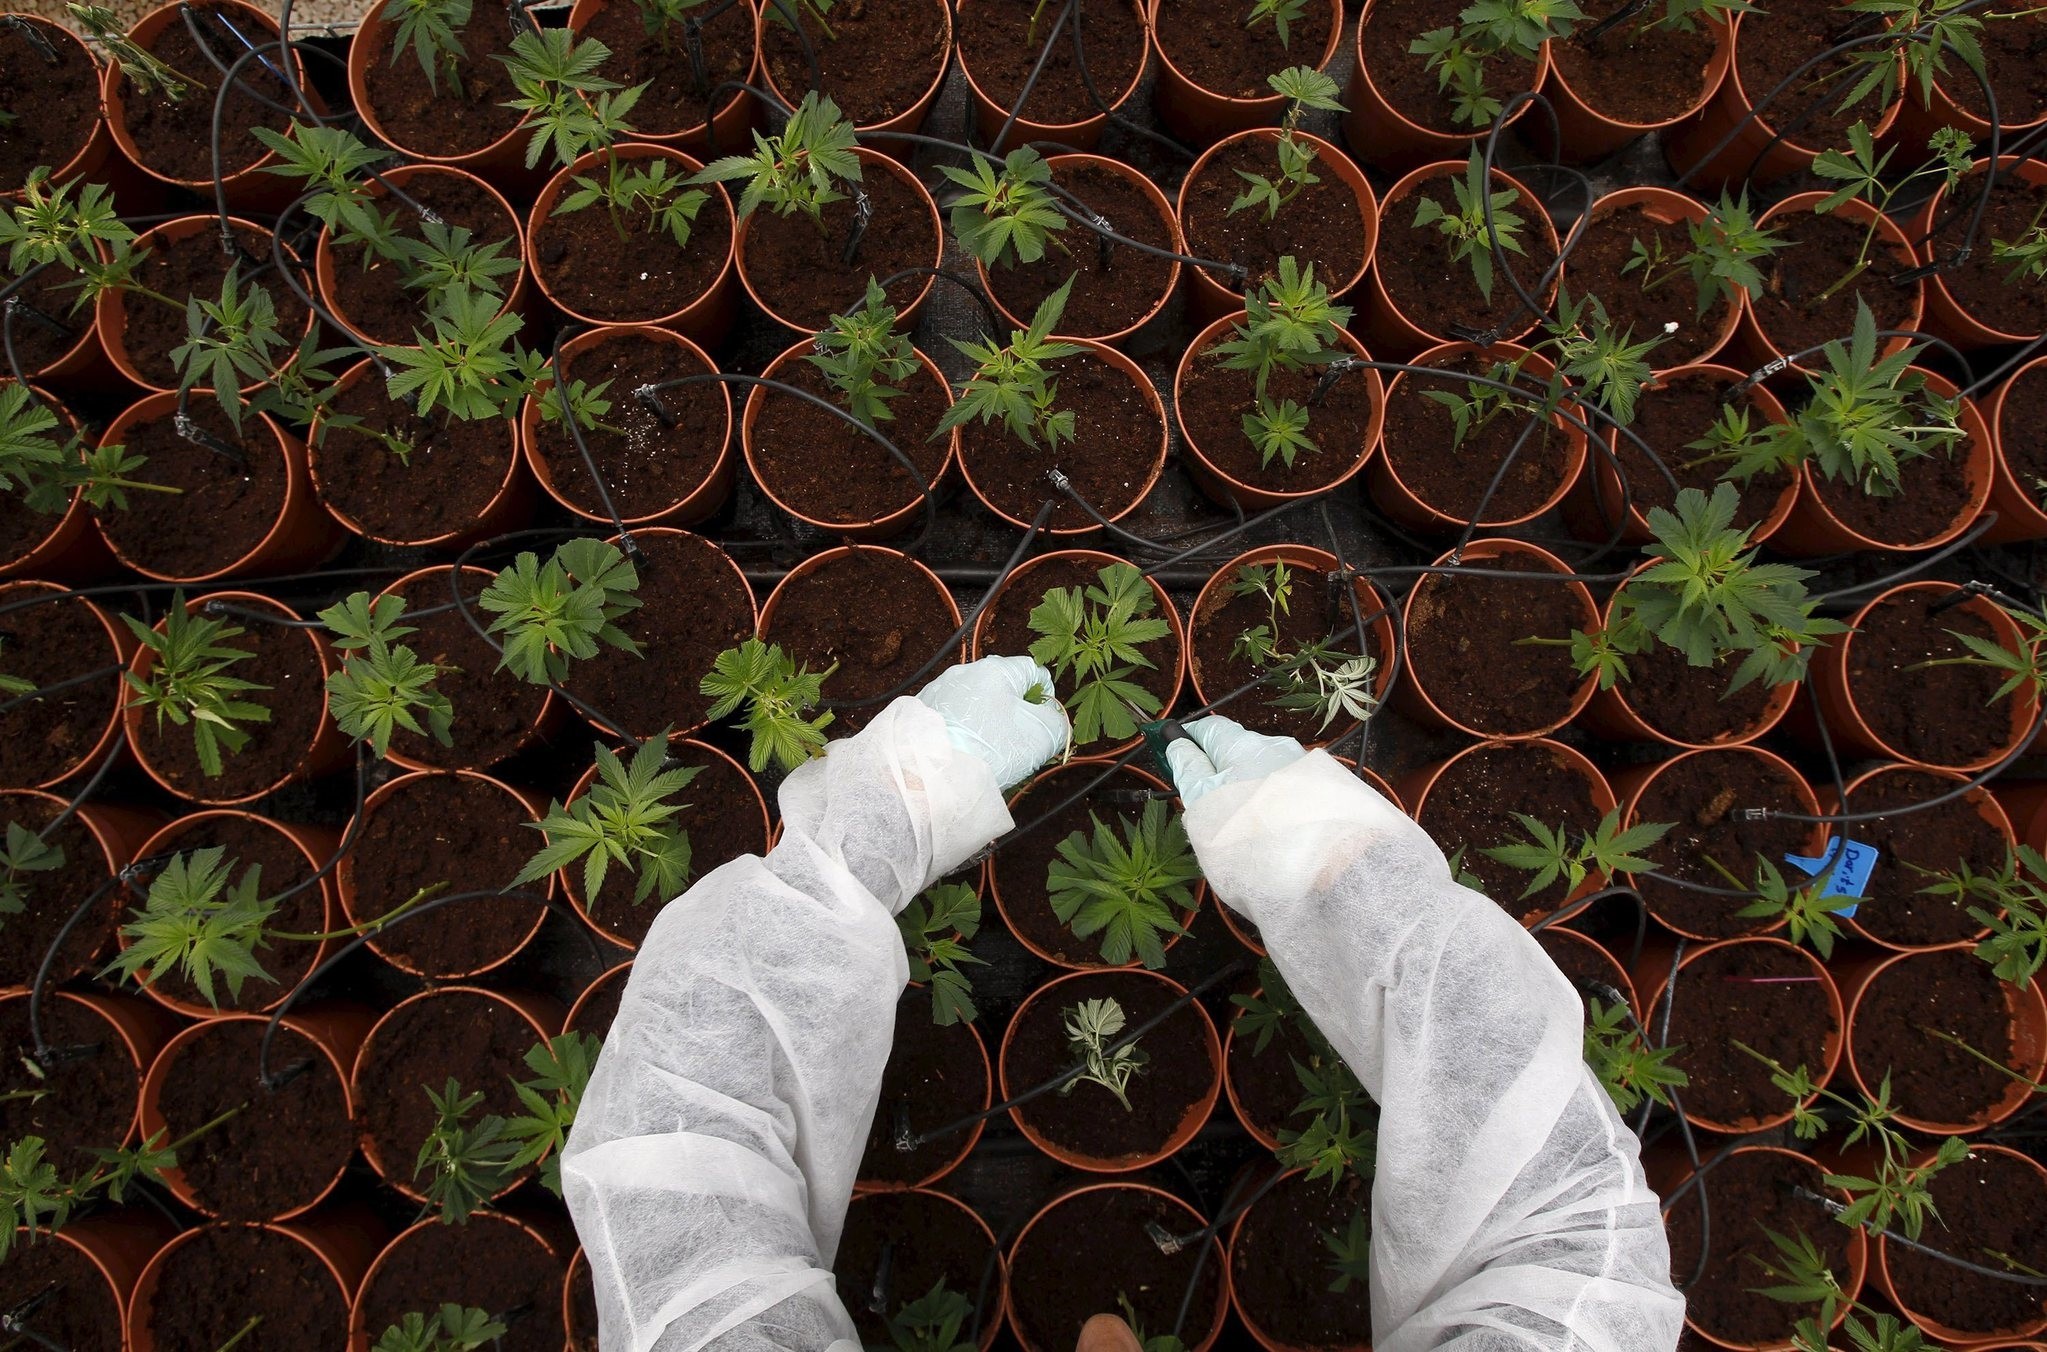 A worker tends to cannabis plants at a plantation near the northern Israeli city of Safed, in this June 11, 2012 file picture. (REUTERS Photo)